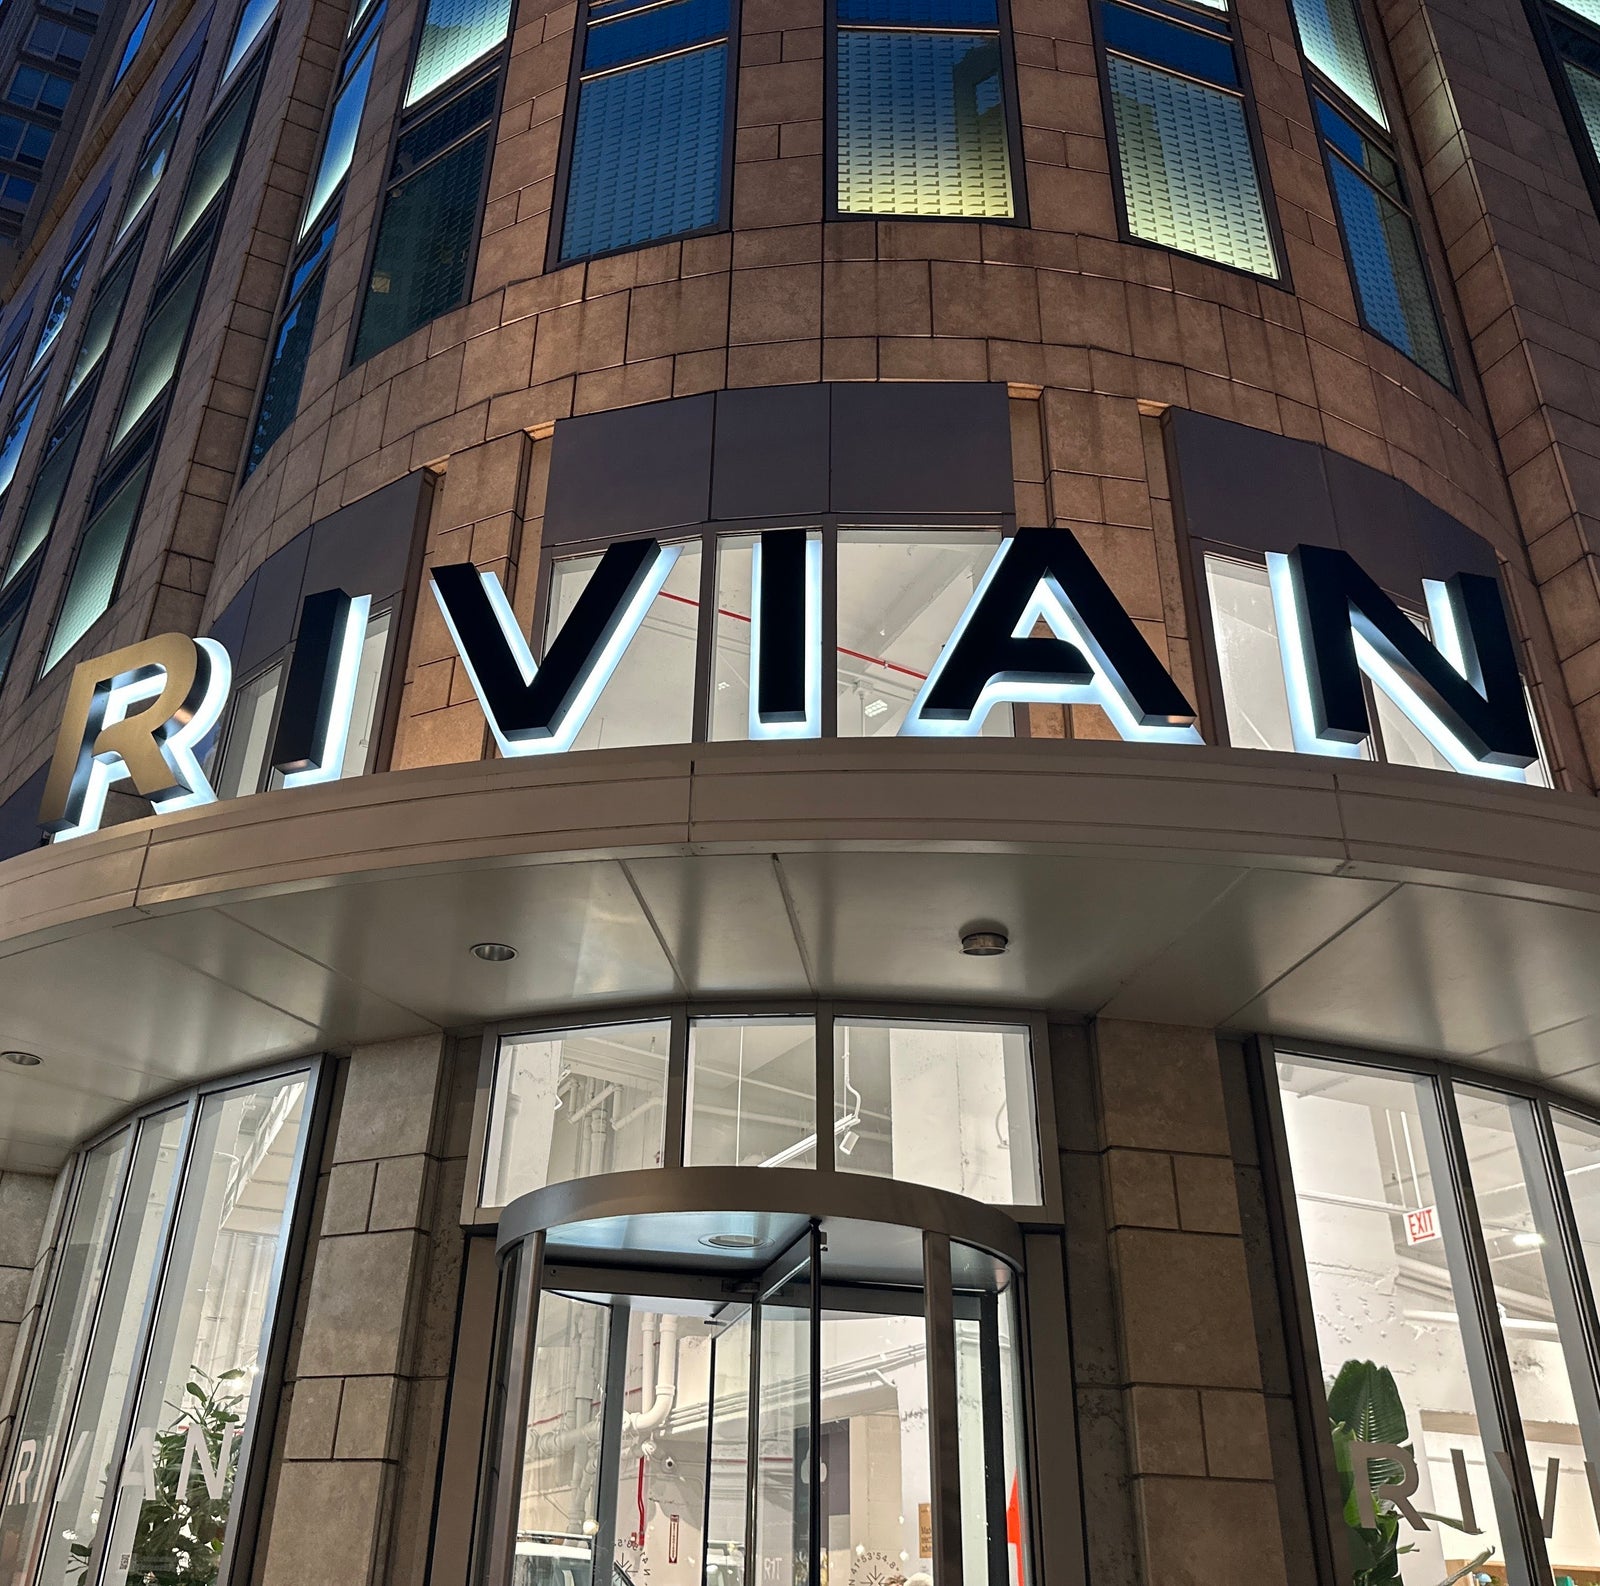 A holiday in Illinois, and a visit to Rivian